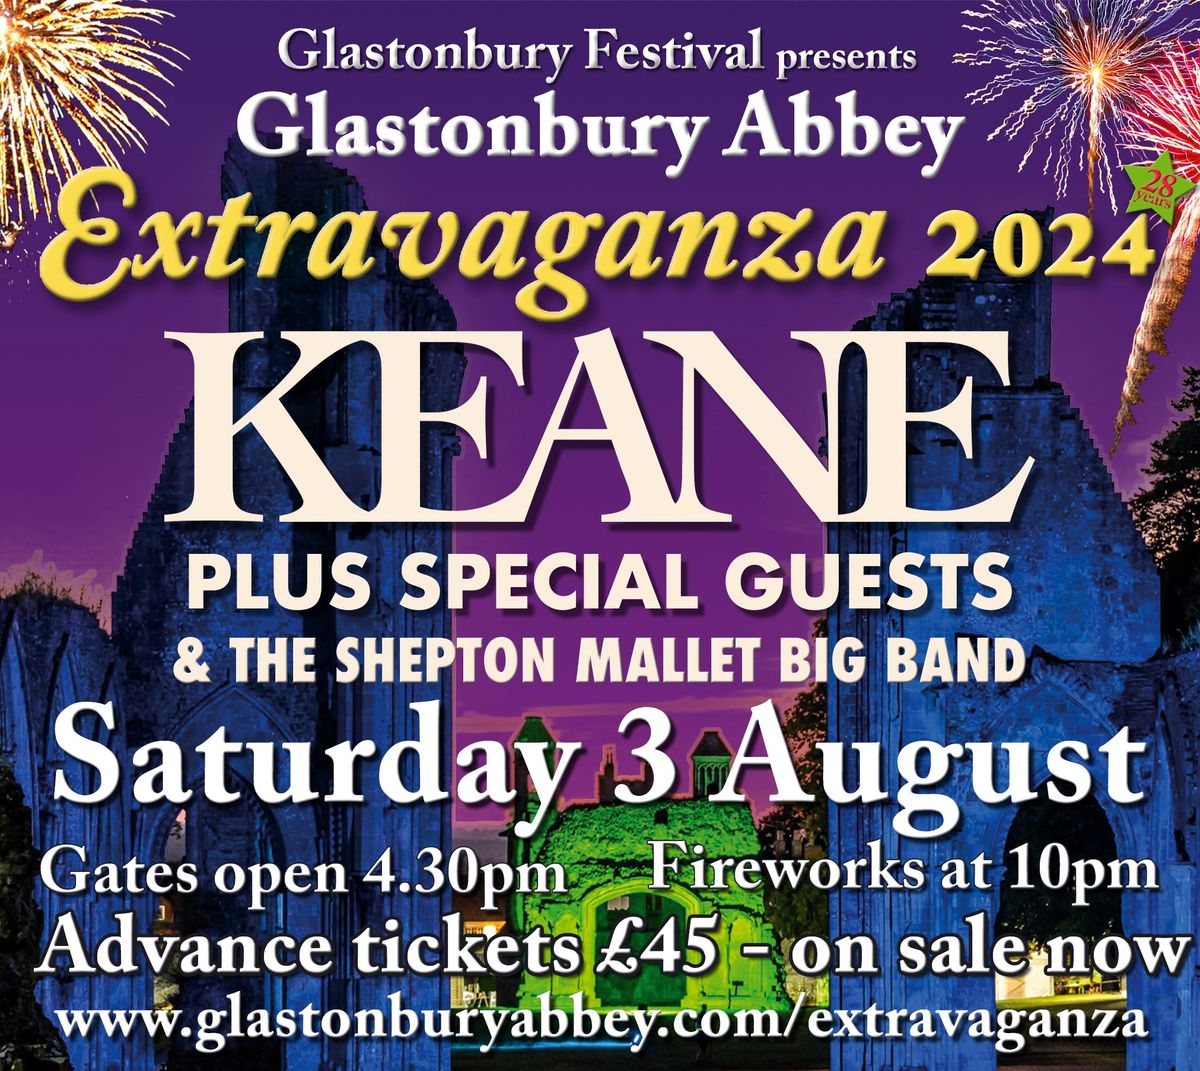 Glastonbury Abbey Extravaganza 2024 featuring Keane & special guests 